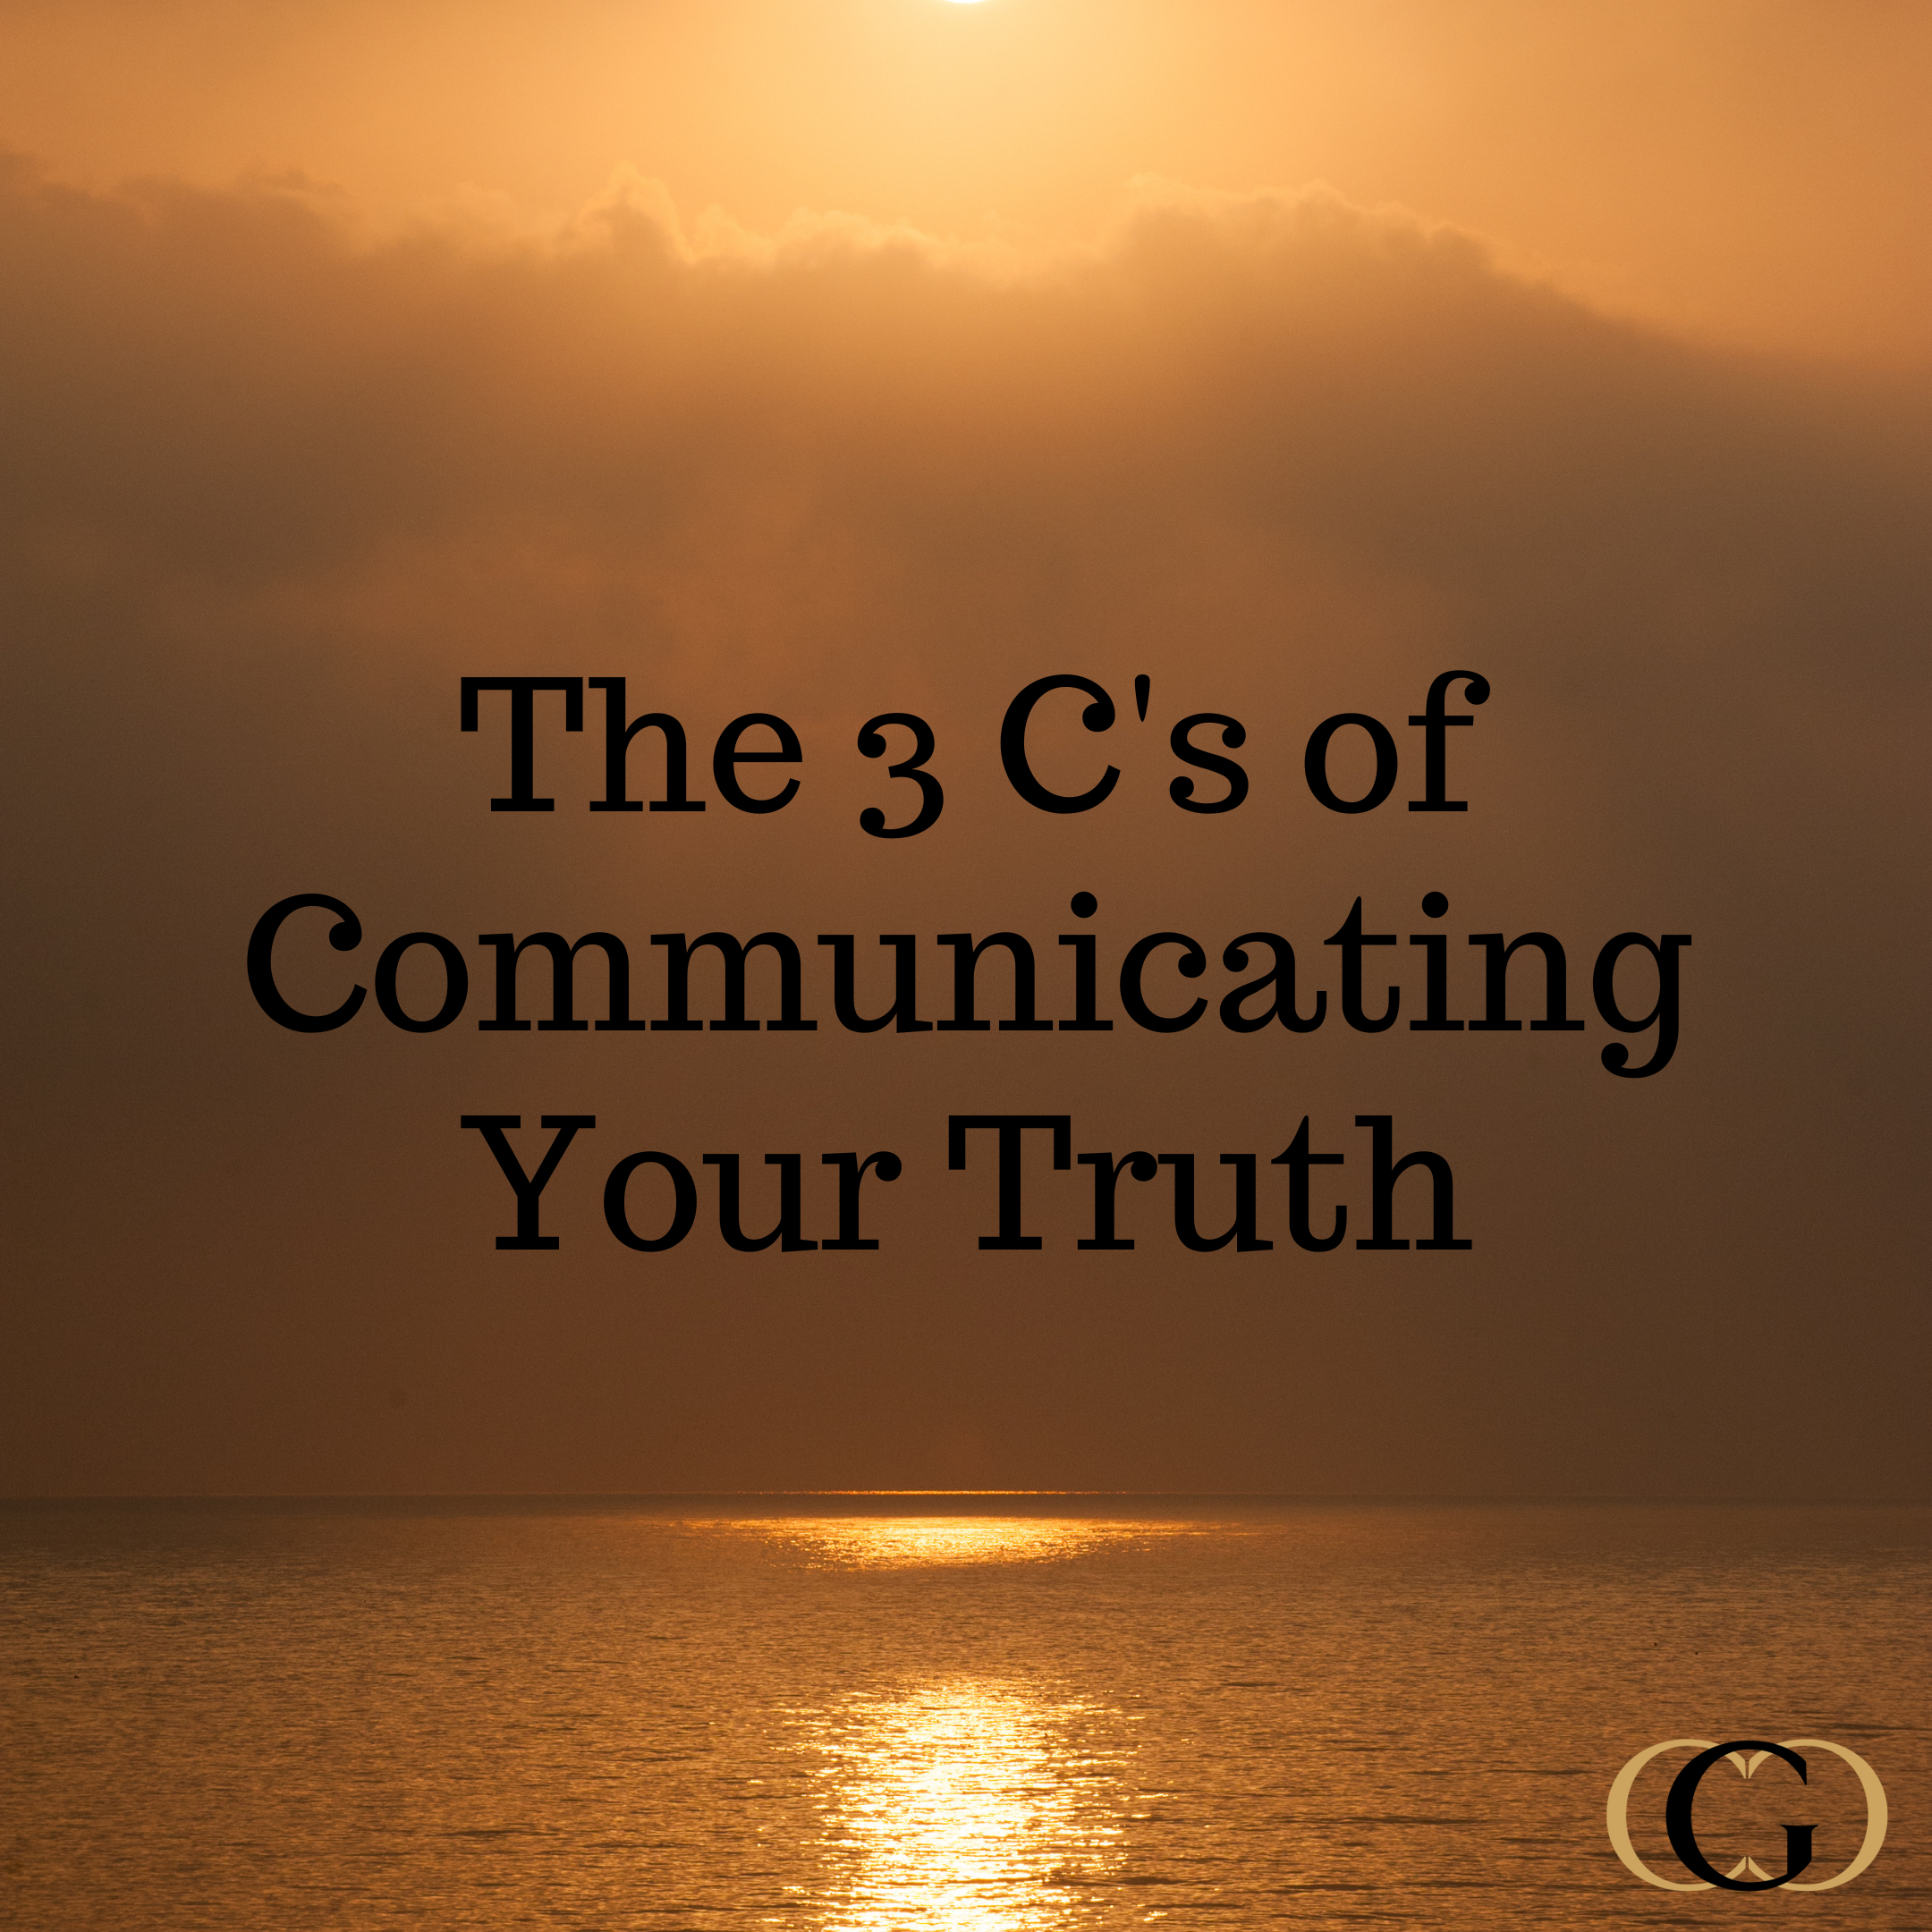 The 3 C's of Communicating Your Truth